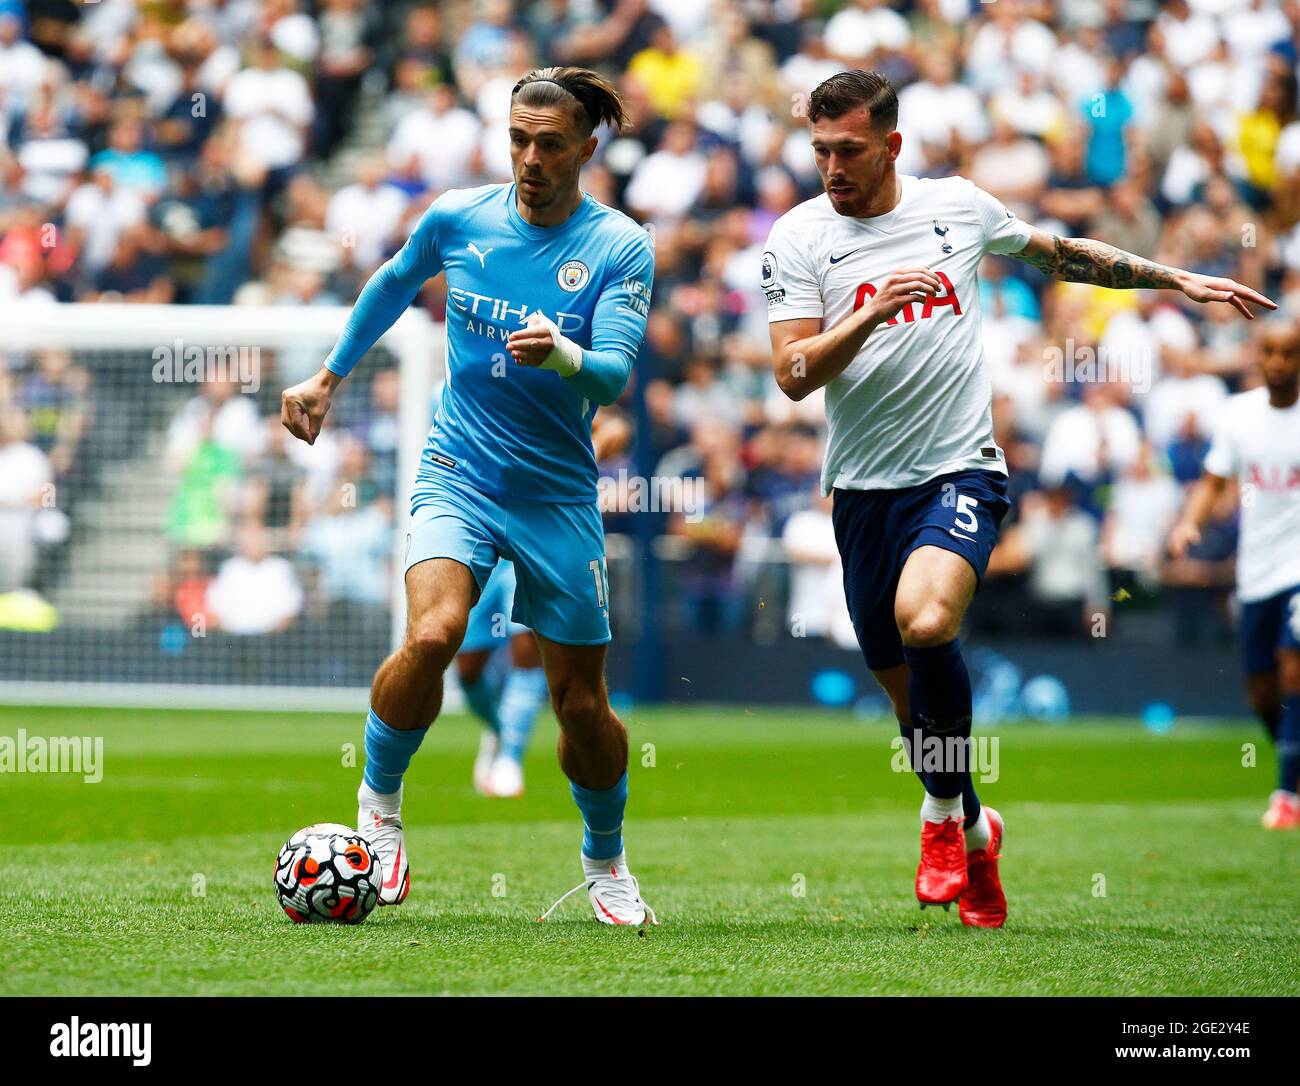 London, England - August 15 :L-R Manchester City's Jack Grealish and Tottenham Hotspur's Pierre-Emile Hojbjerg during Premier League between Tottenham Stock Photo